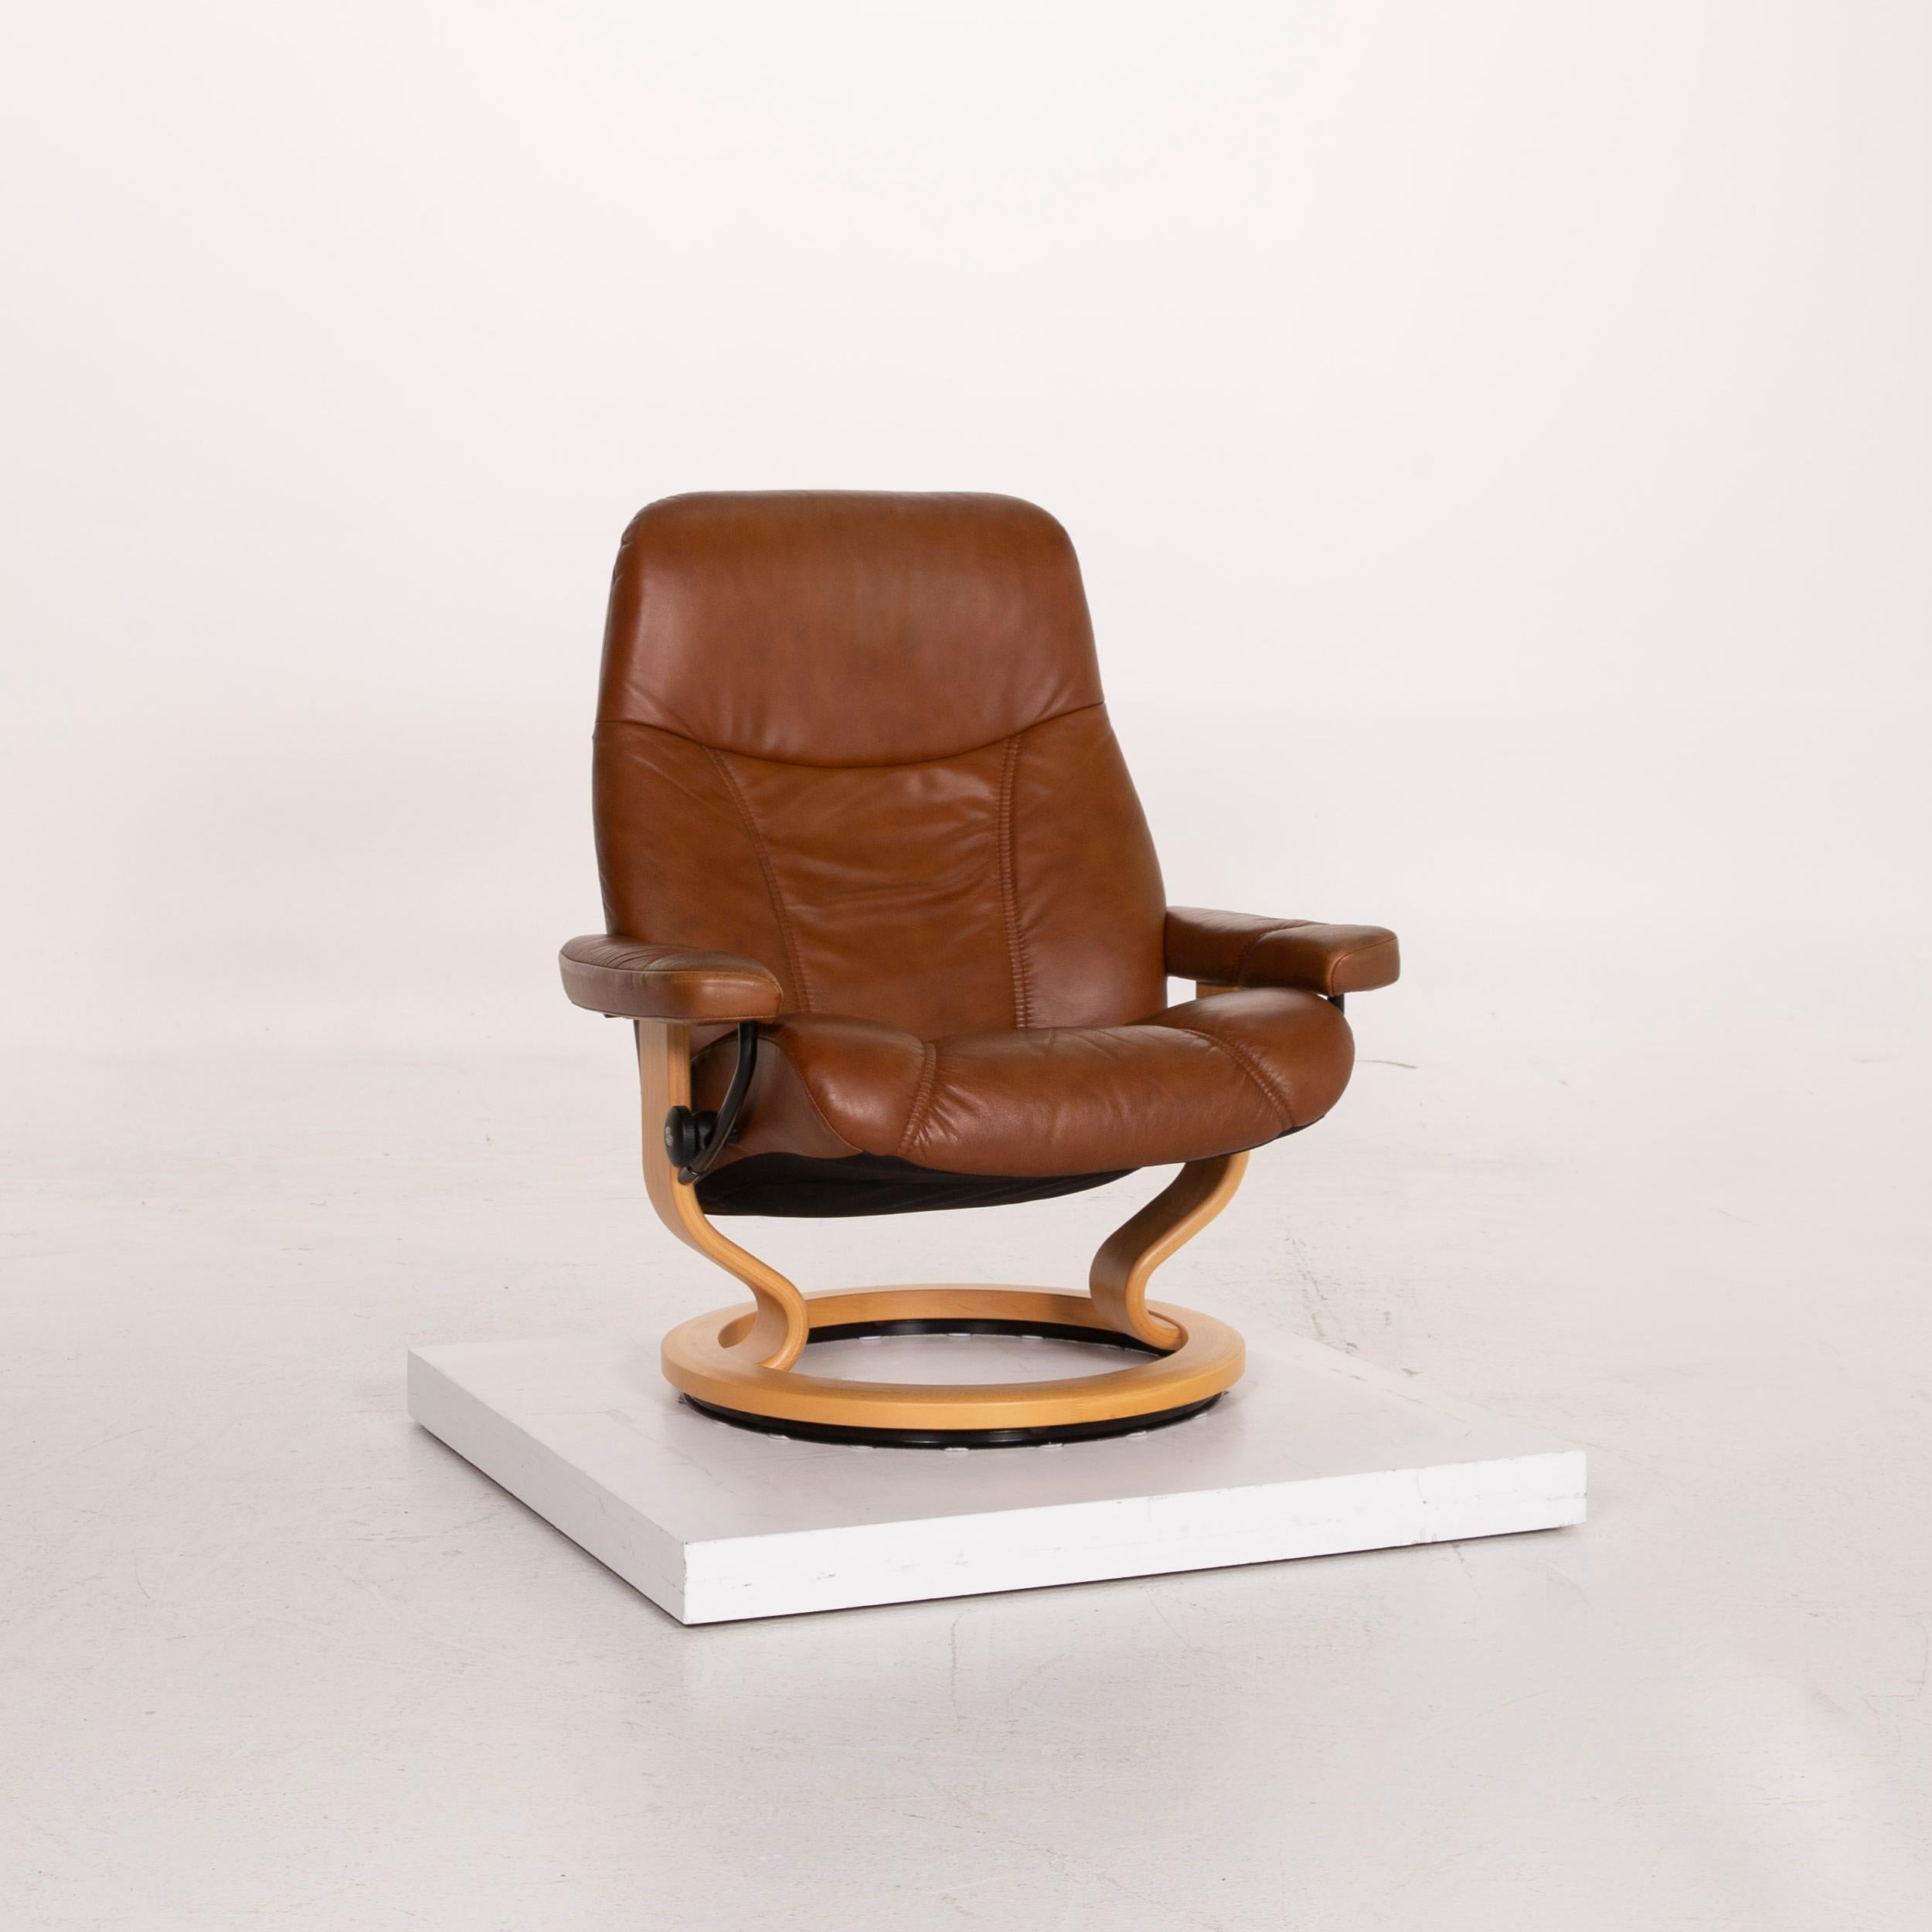 Stressless Consul Leather Armchair Cognac Incl. Ottoman Relaxation Function 1